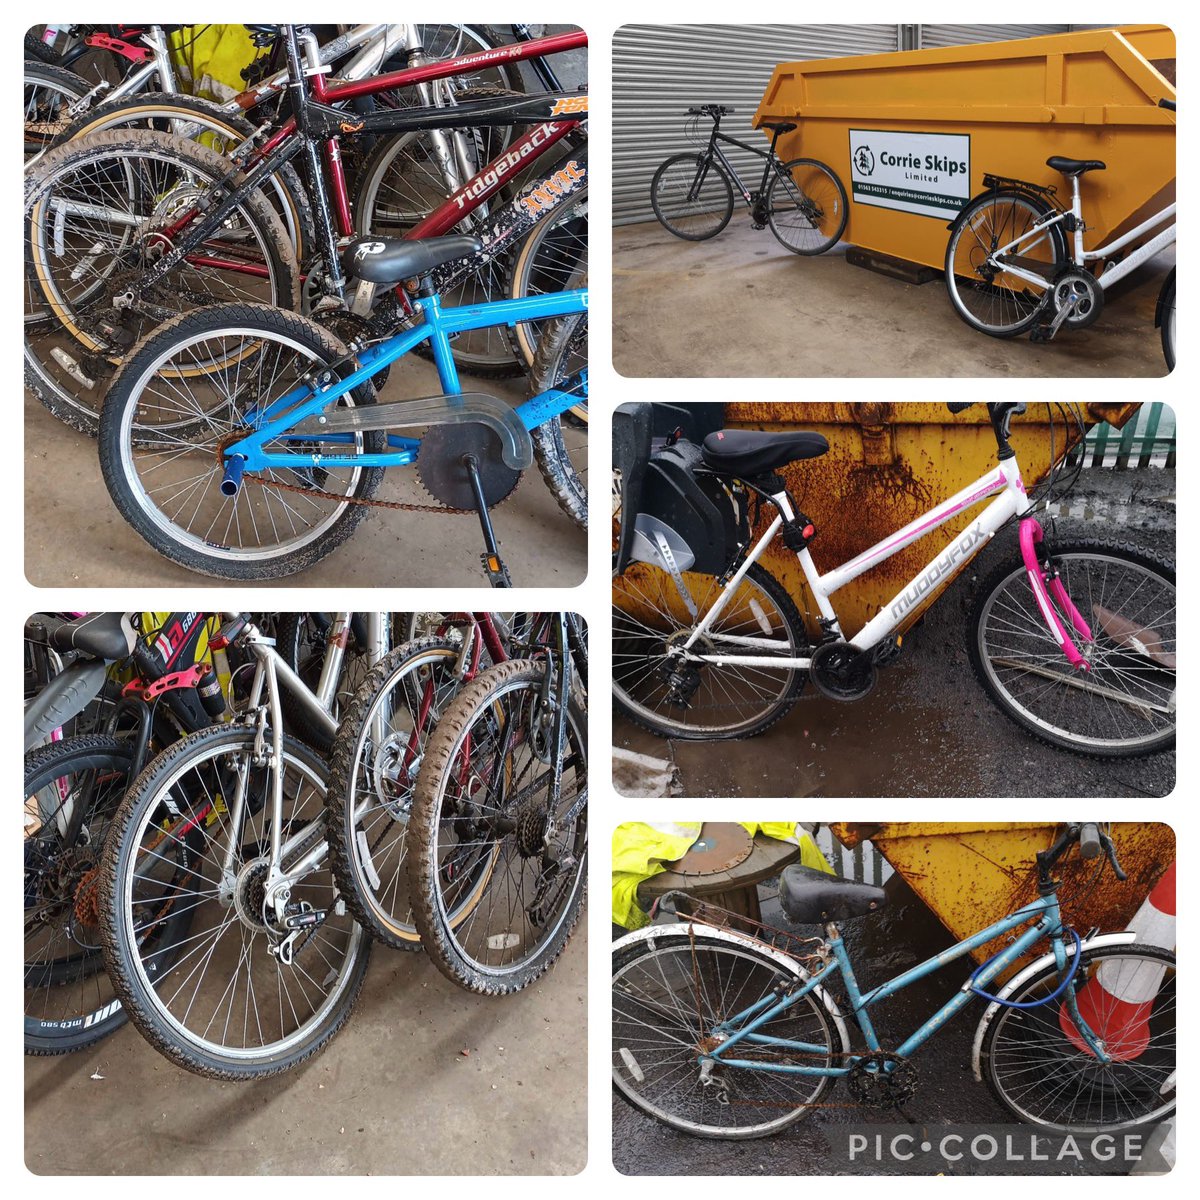 Massive thanks to Corrie Skips for delivering these bikes to help our pupils in the cycle maintenance project #recycling #fixingup #newskills @Kilwinning_Acad @Triggerbhoy1888